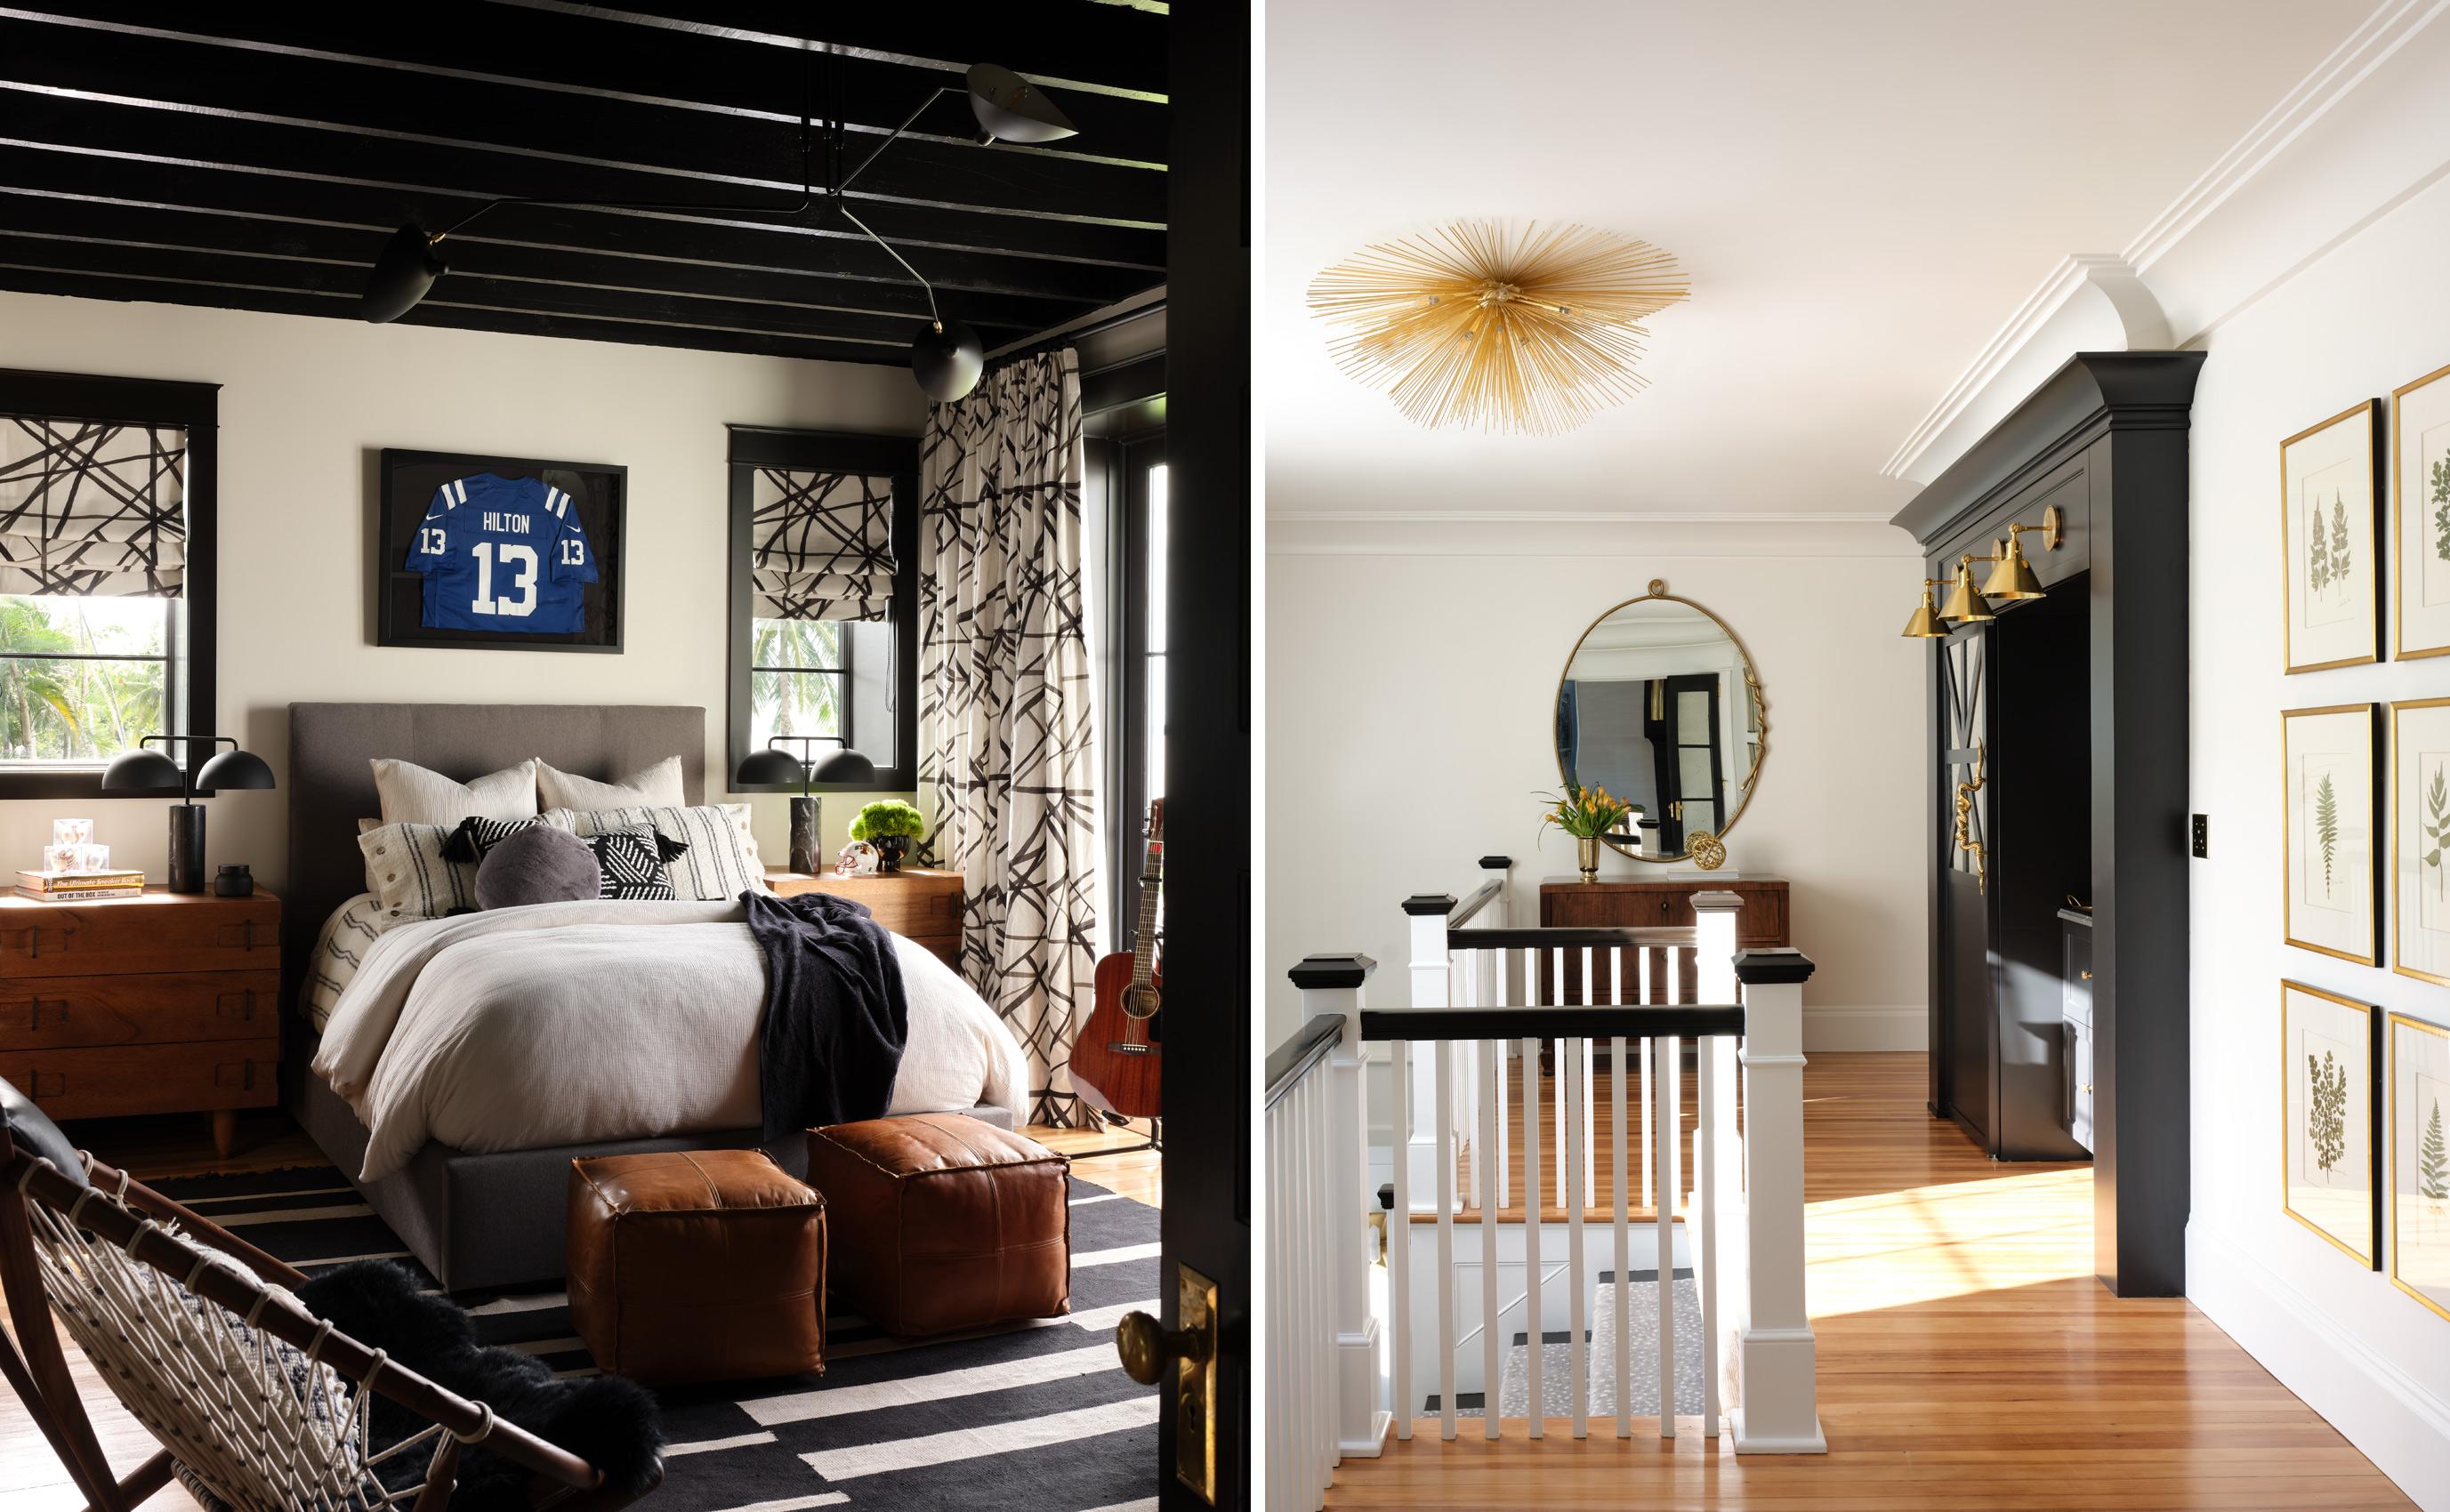 Boys bedroom and stairwell by Renee Gaddis Interiors, photo by Mali Azima.